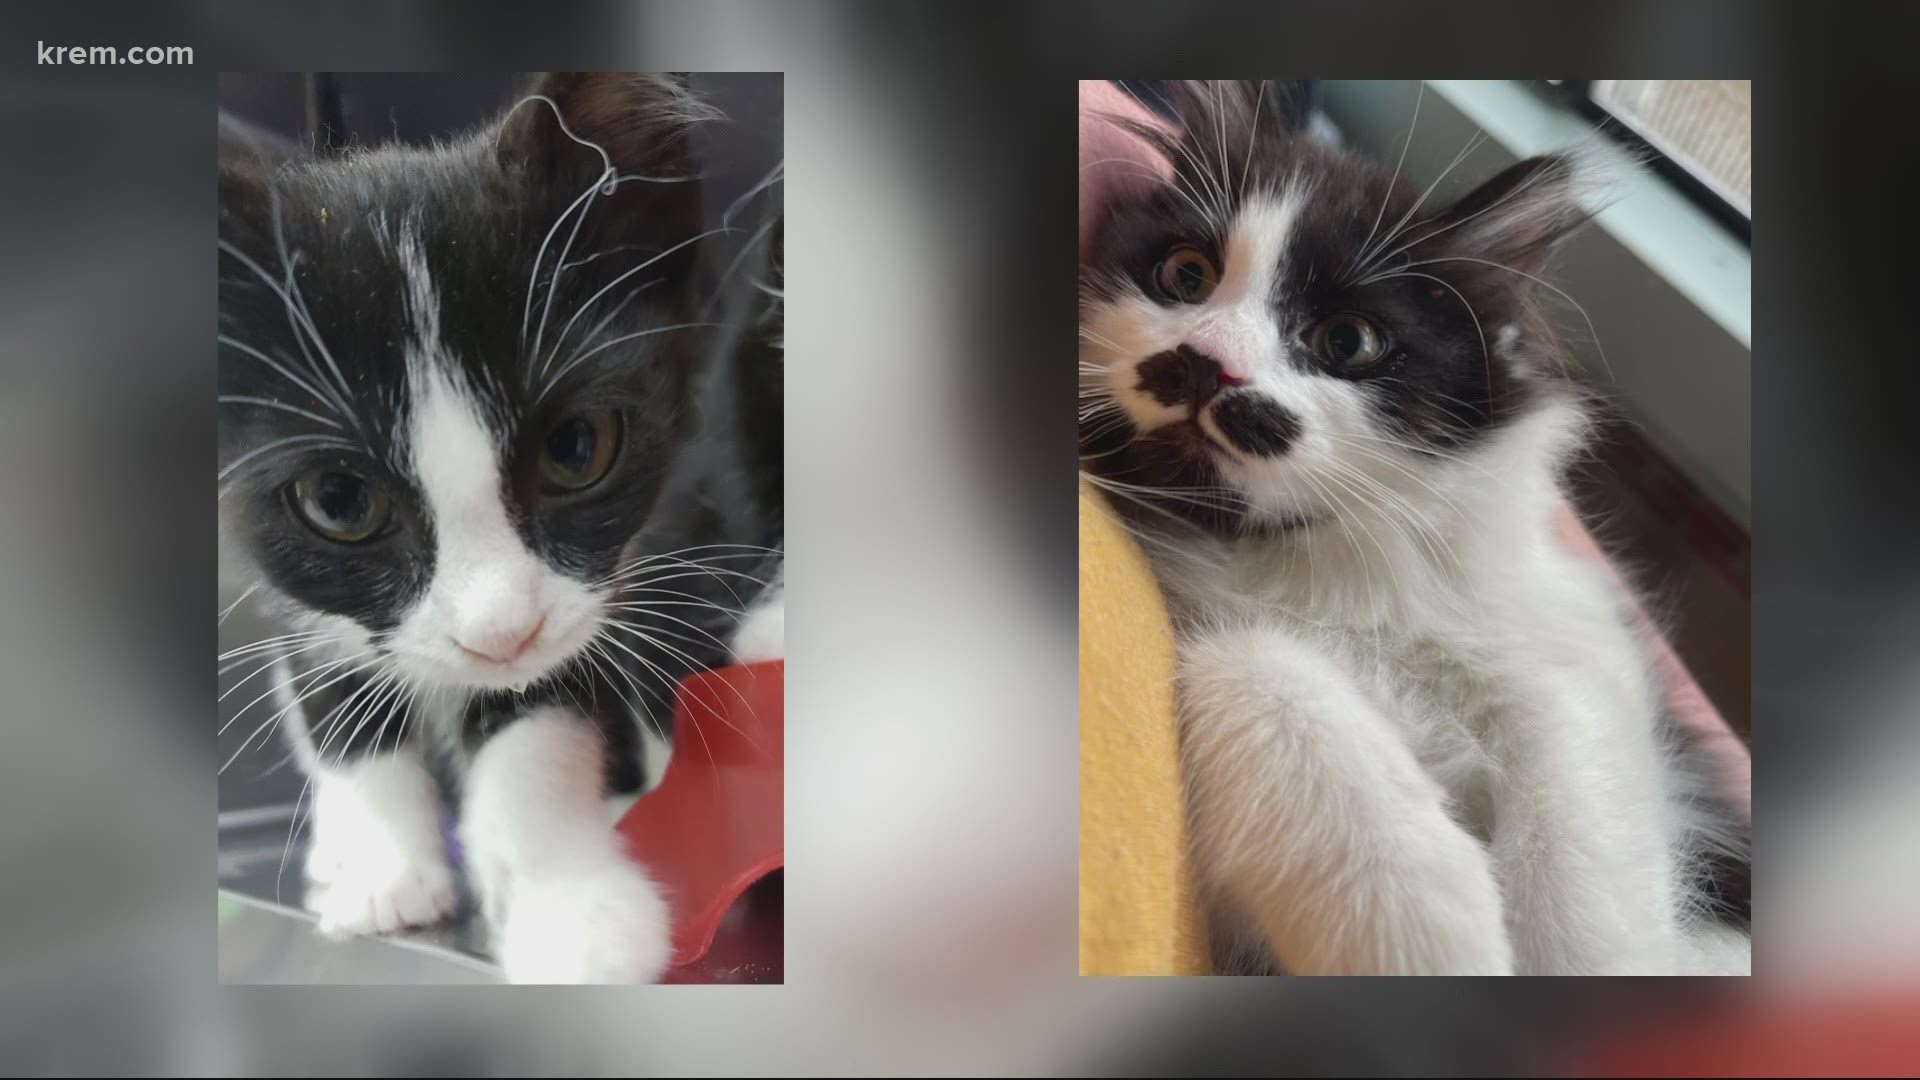 Meet this week's Pick of the Litter, two kittens named Sanchez and Reba McEntire on KREM 2 News at Noon on May 4, 2021